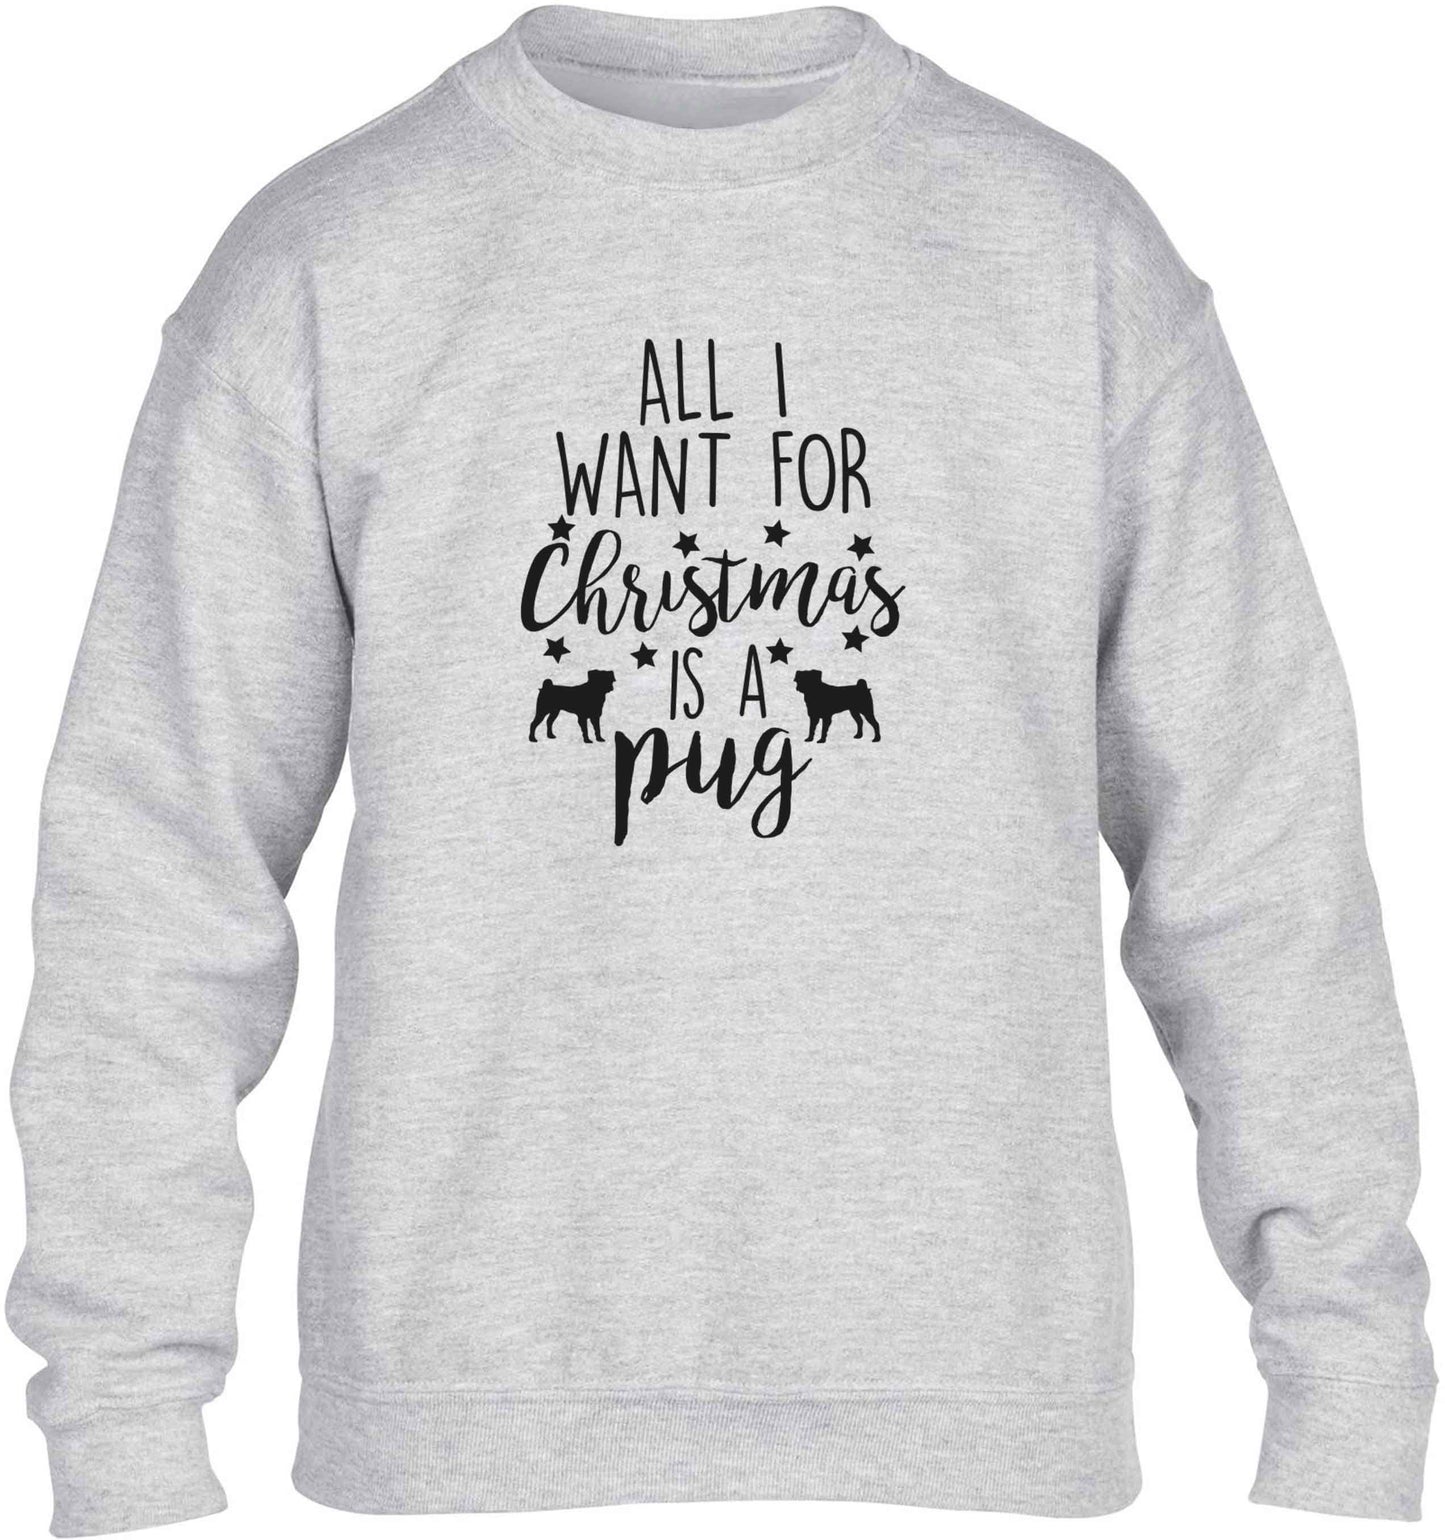 All I want for Christmas is a pug children's grey sweater 12-13 Years